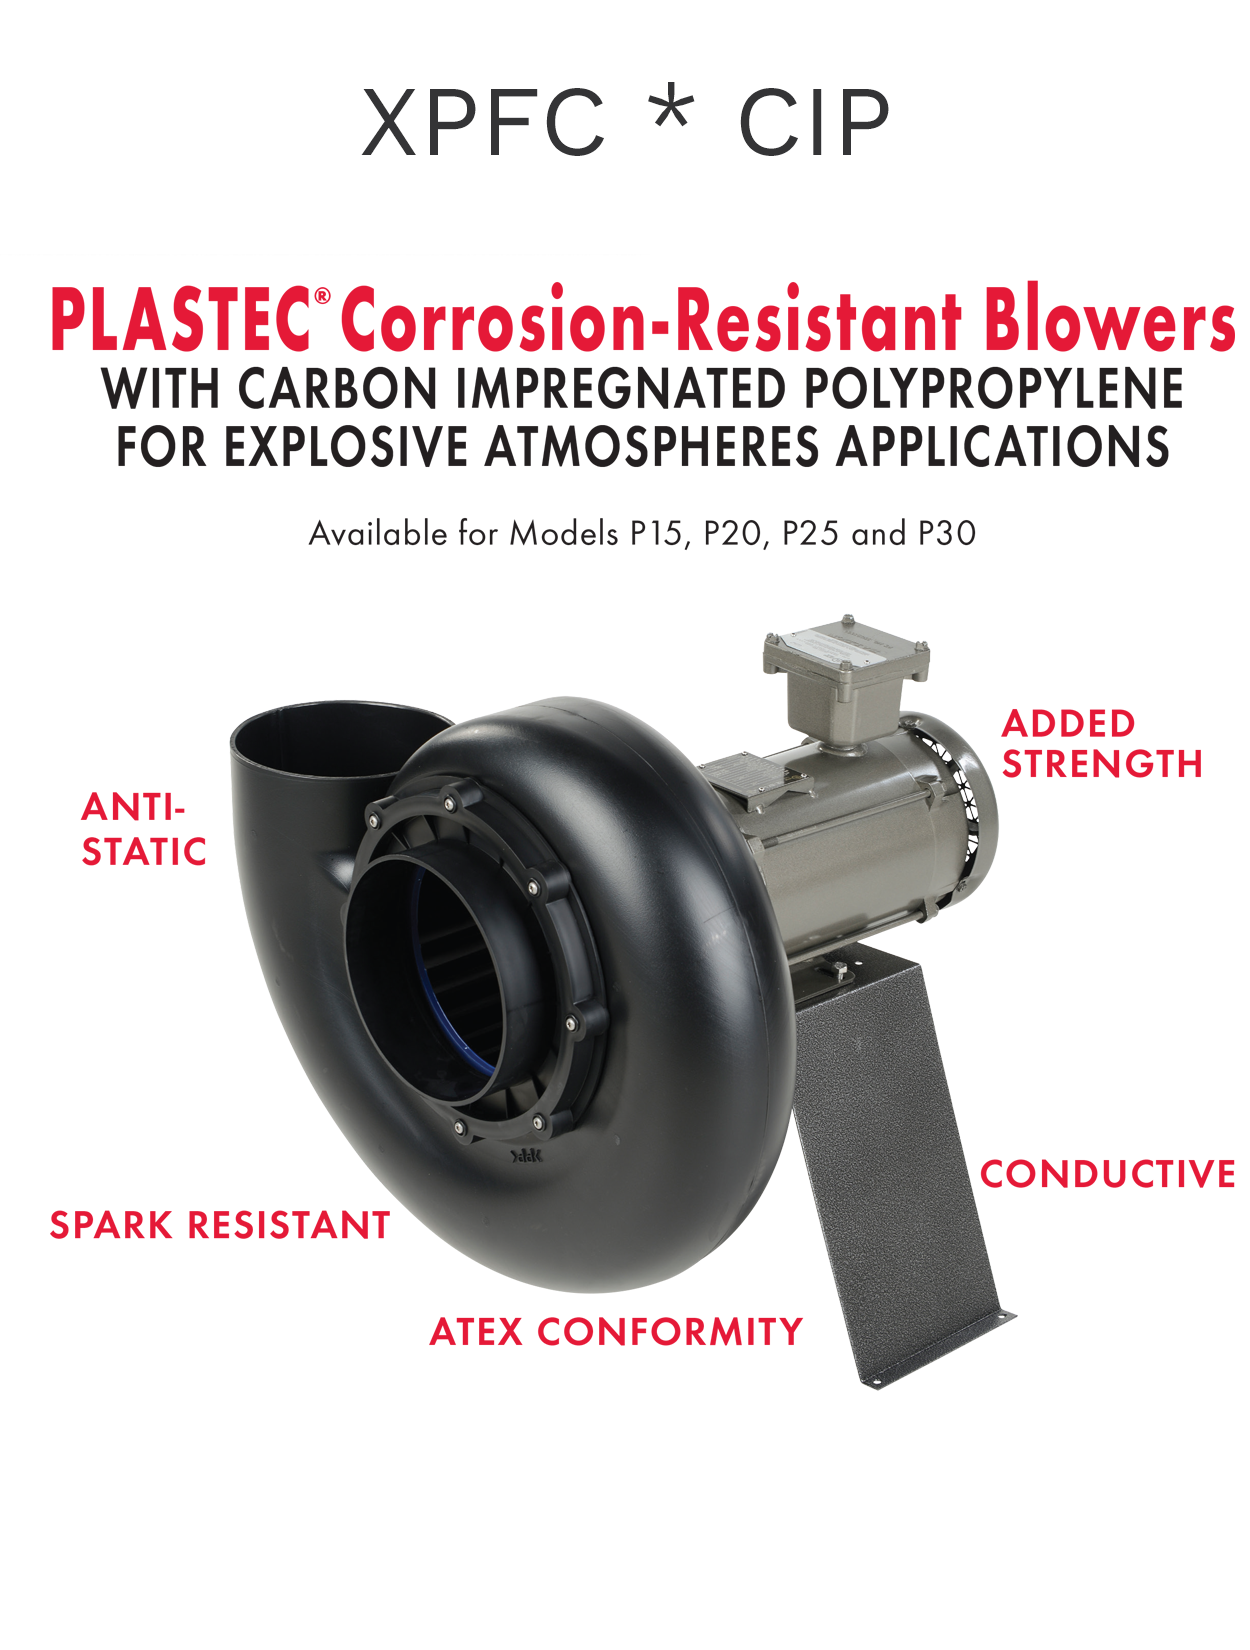 Plastec 30 Direct Drive Forward Curve Polypropylene Blower available in explosion-proof option made with Carbon Impregnated Polypropylene